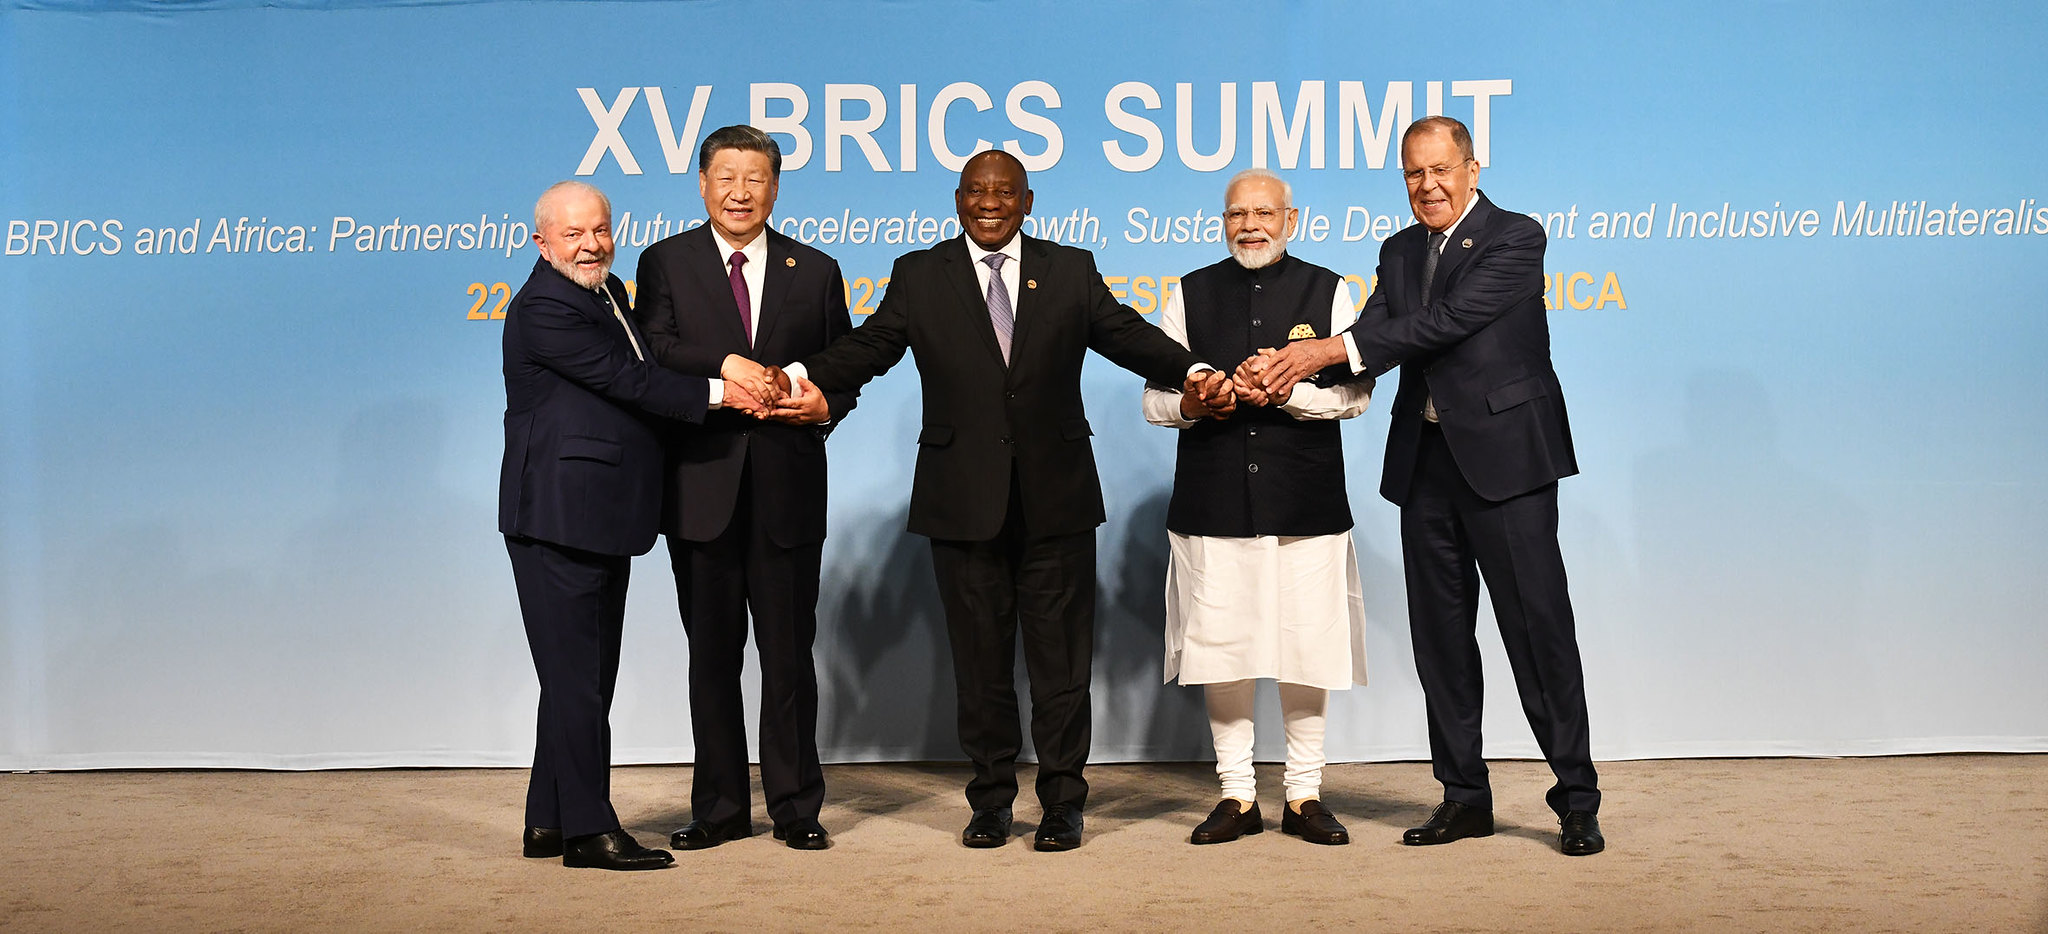 Brazilian president Lula de Silva, Chinese president Xi Jinping, South Africa’s president Cyril Ramaphosa, Indian Prime Minister Narendra Modi and Russian foreign minister Sergey Lavrov at the BRICS summit in Johannesburg, South Africa, 22 August 2023. © GCIS, Government ZA via Flickr